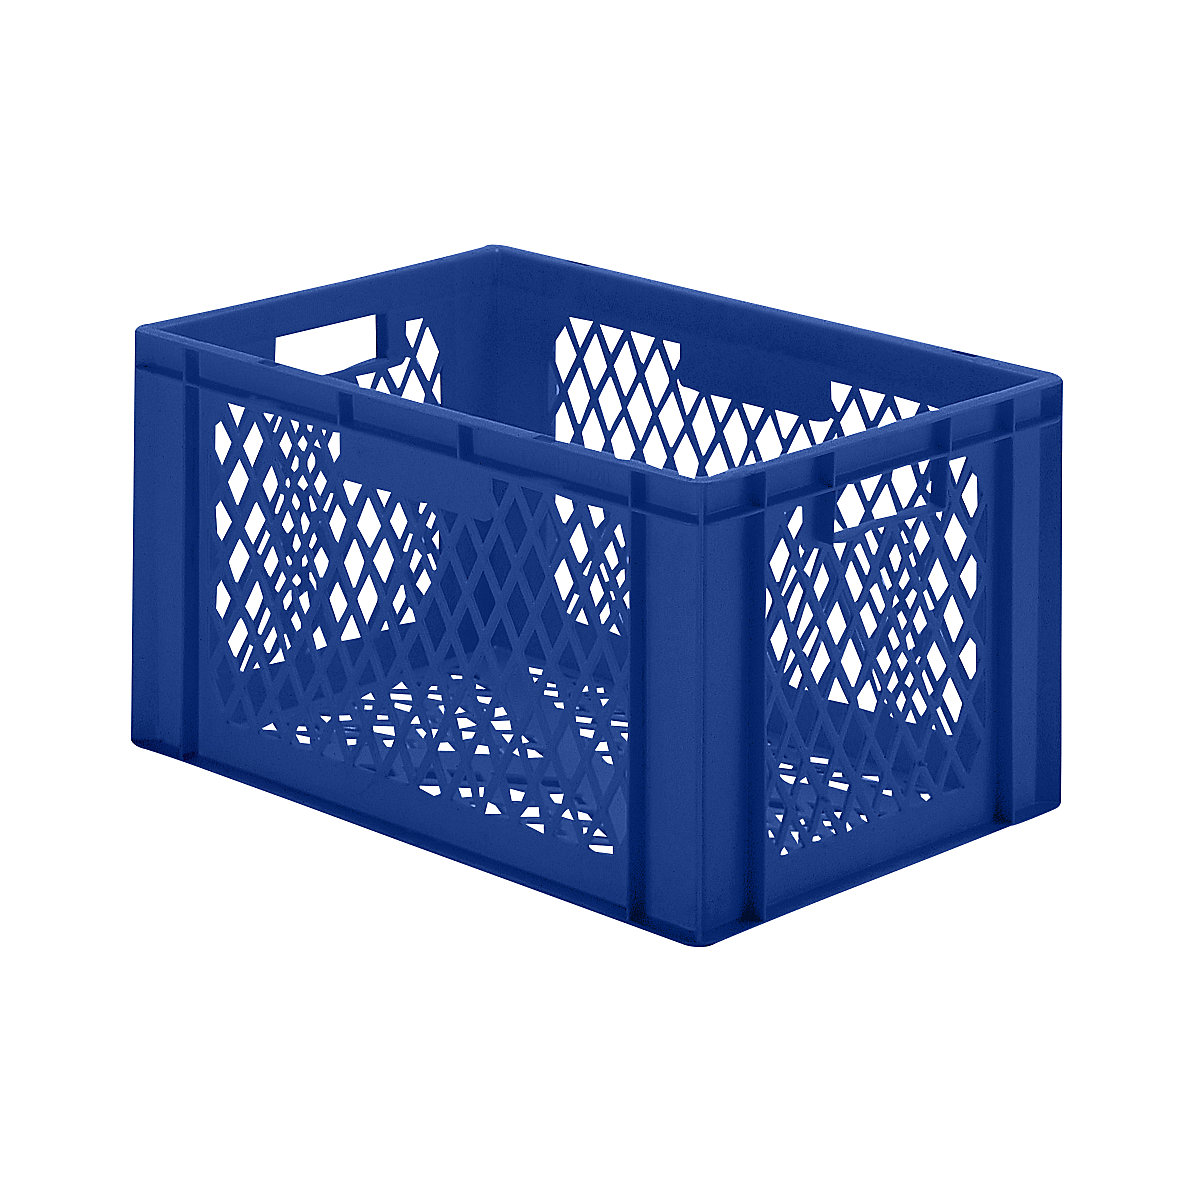 Euro stacking container, perforated walls and base, LxWxH 600 x 400 x 320 mm, blue, pack of 5